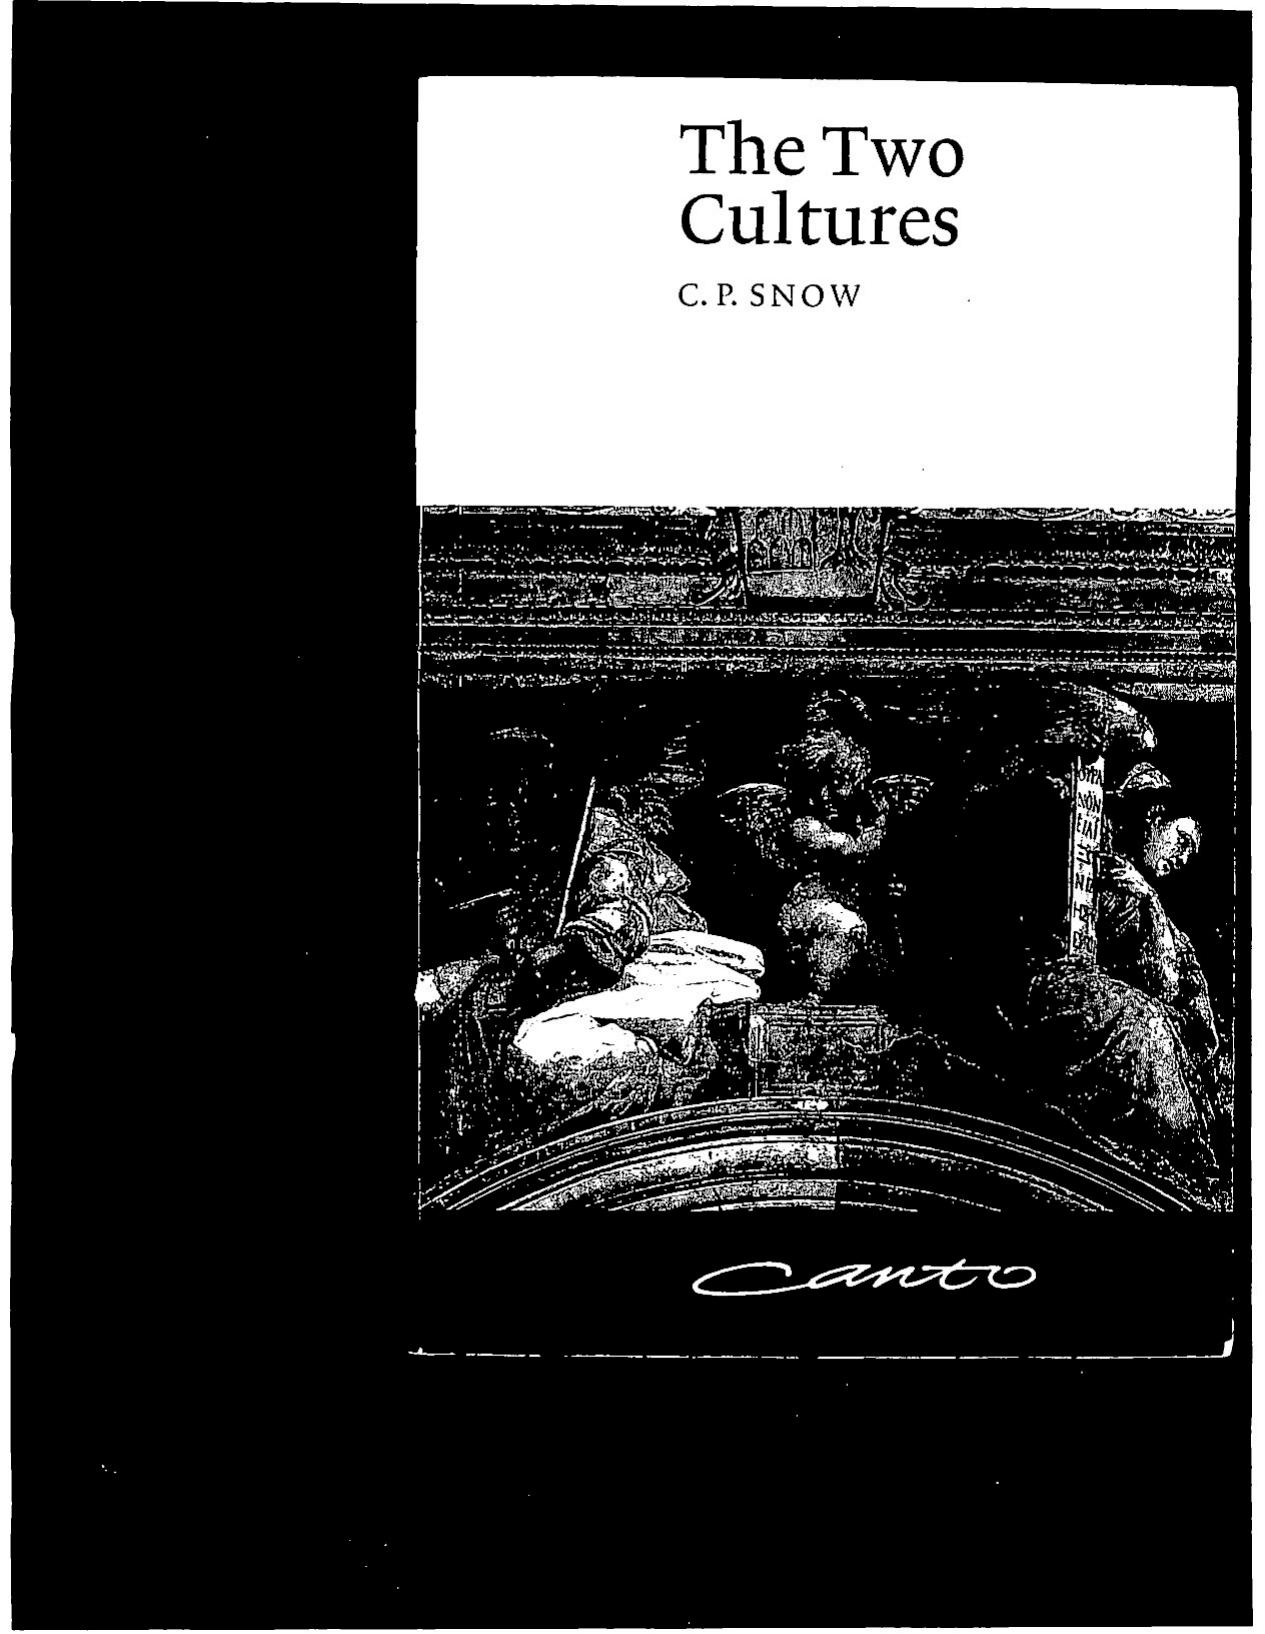 The Two Cultures by C. P. Snow